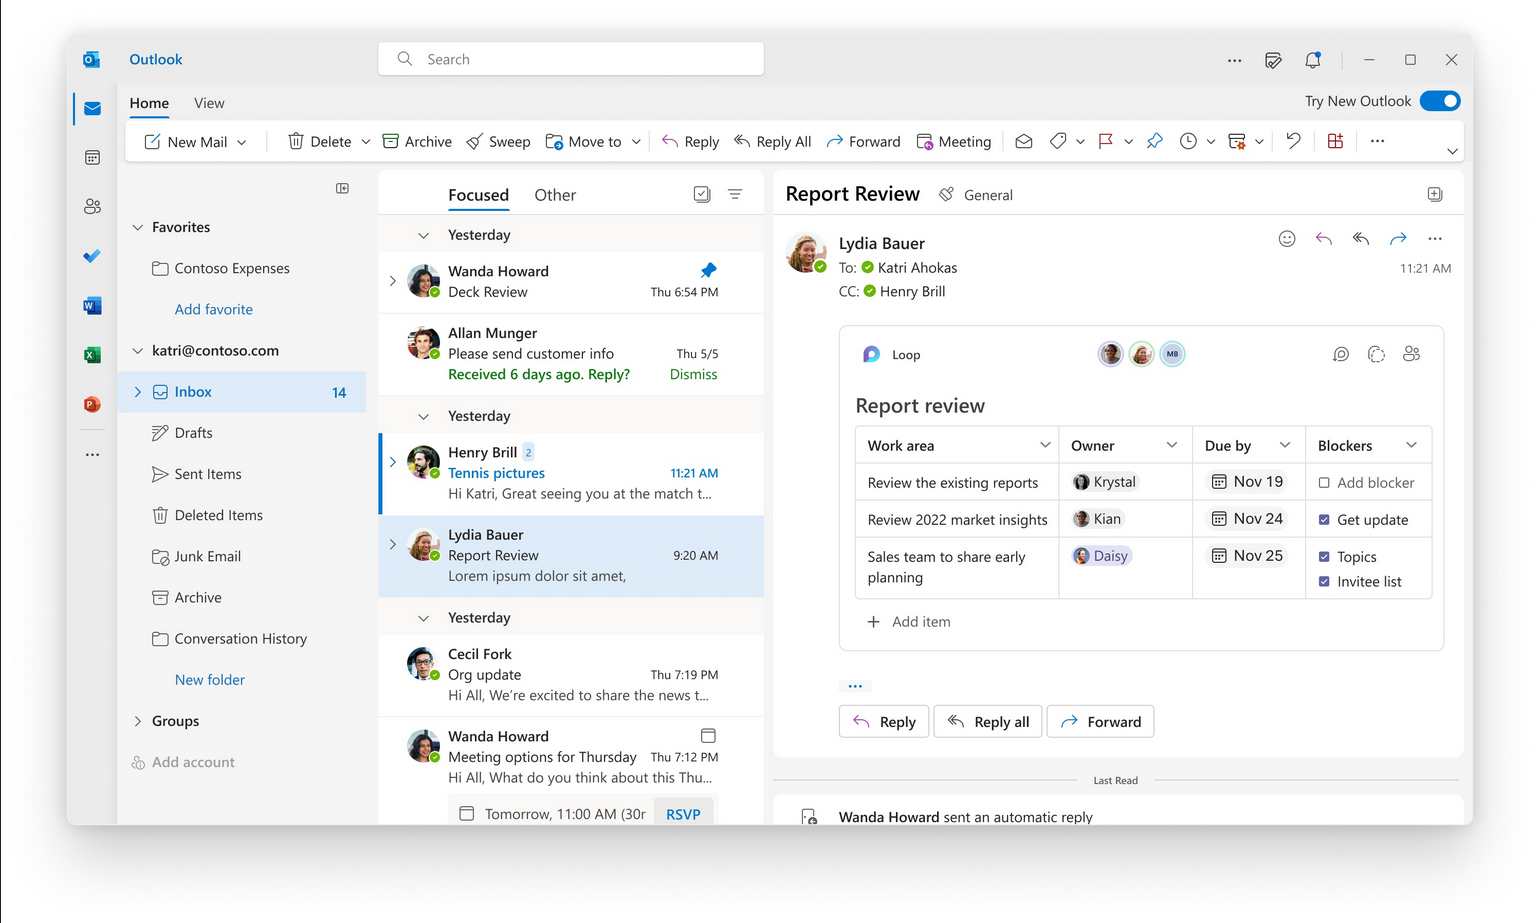 Microsoft Outlook Redesign Now Available for Trial on Outlook for Windows and Outlook on the Web